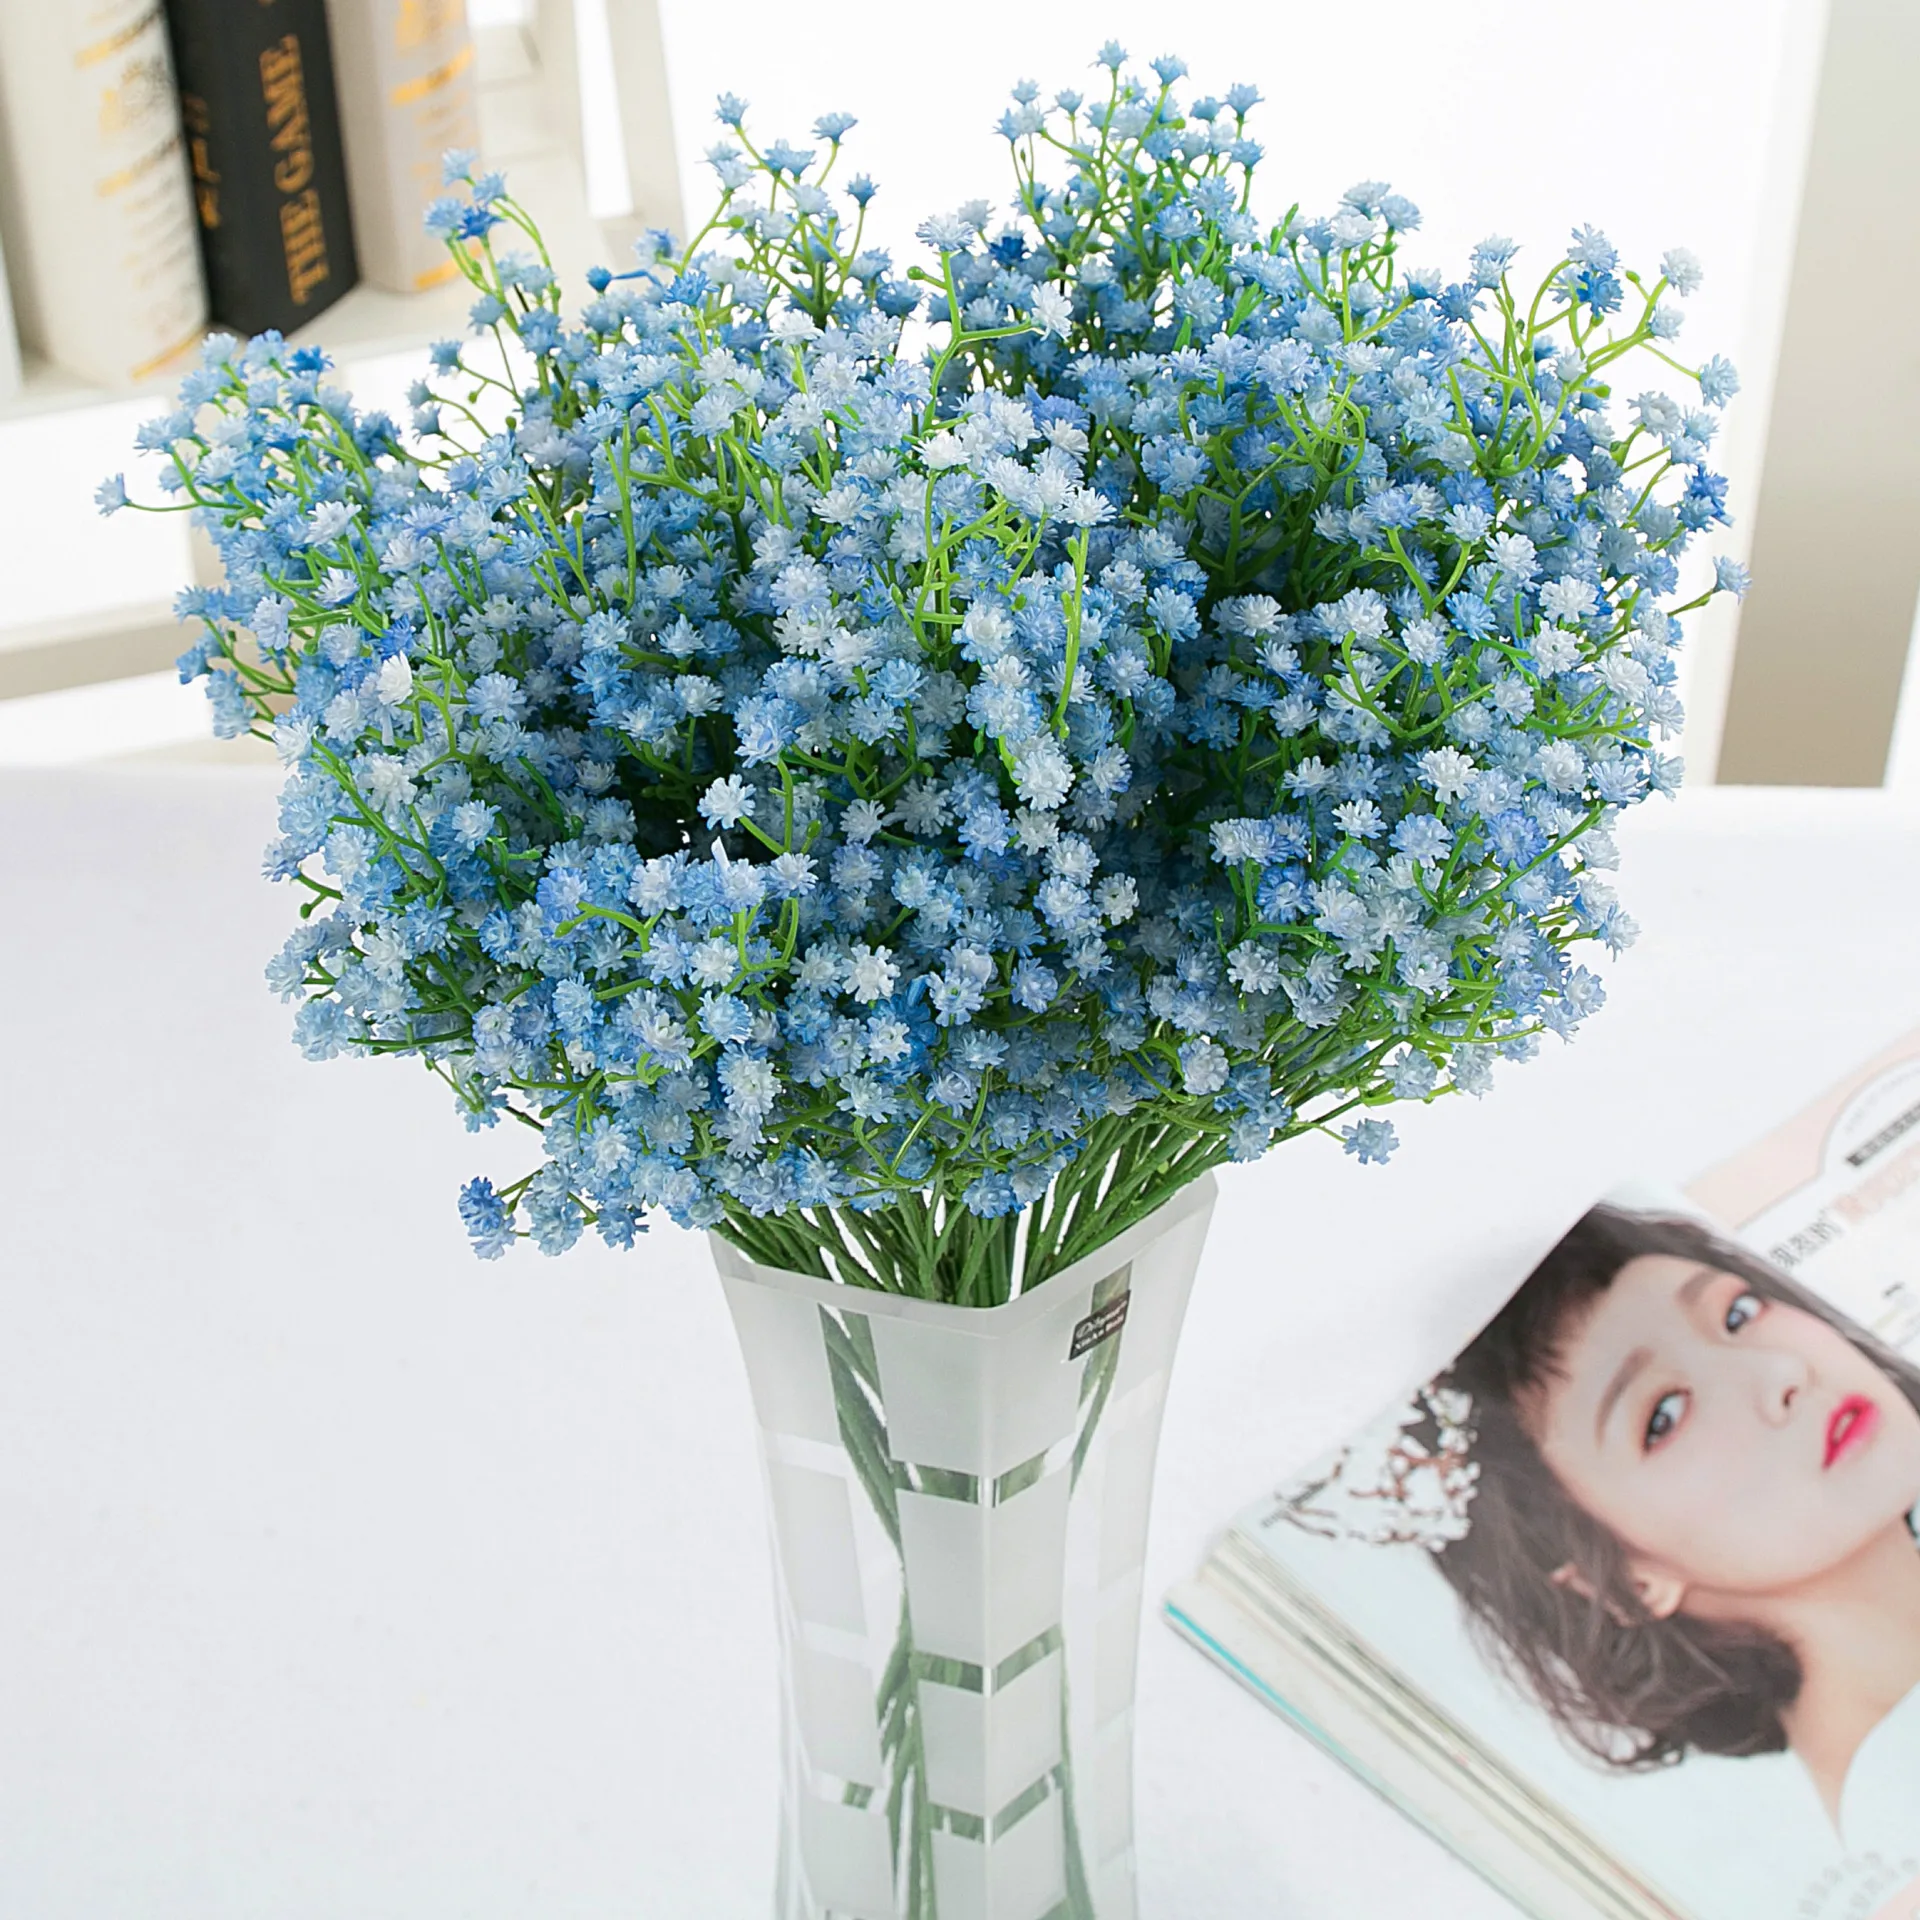 Duovlo 10pcs Babies Breath Flowers 23.6 Artificial Gypsophila Bouquets Real Touch Flowers for Wedding Home DIY Decor